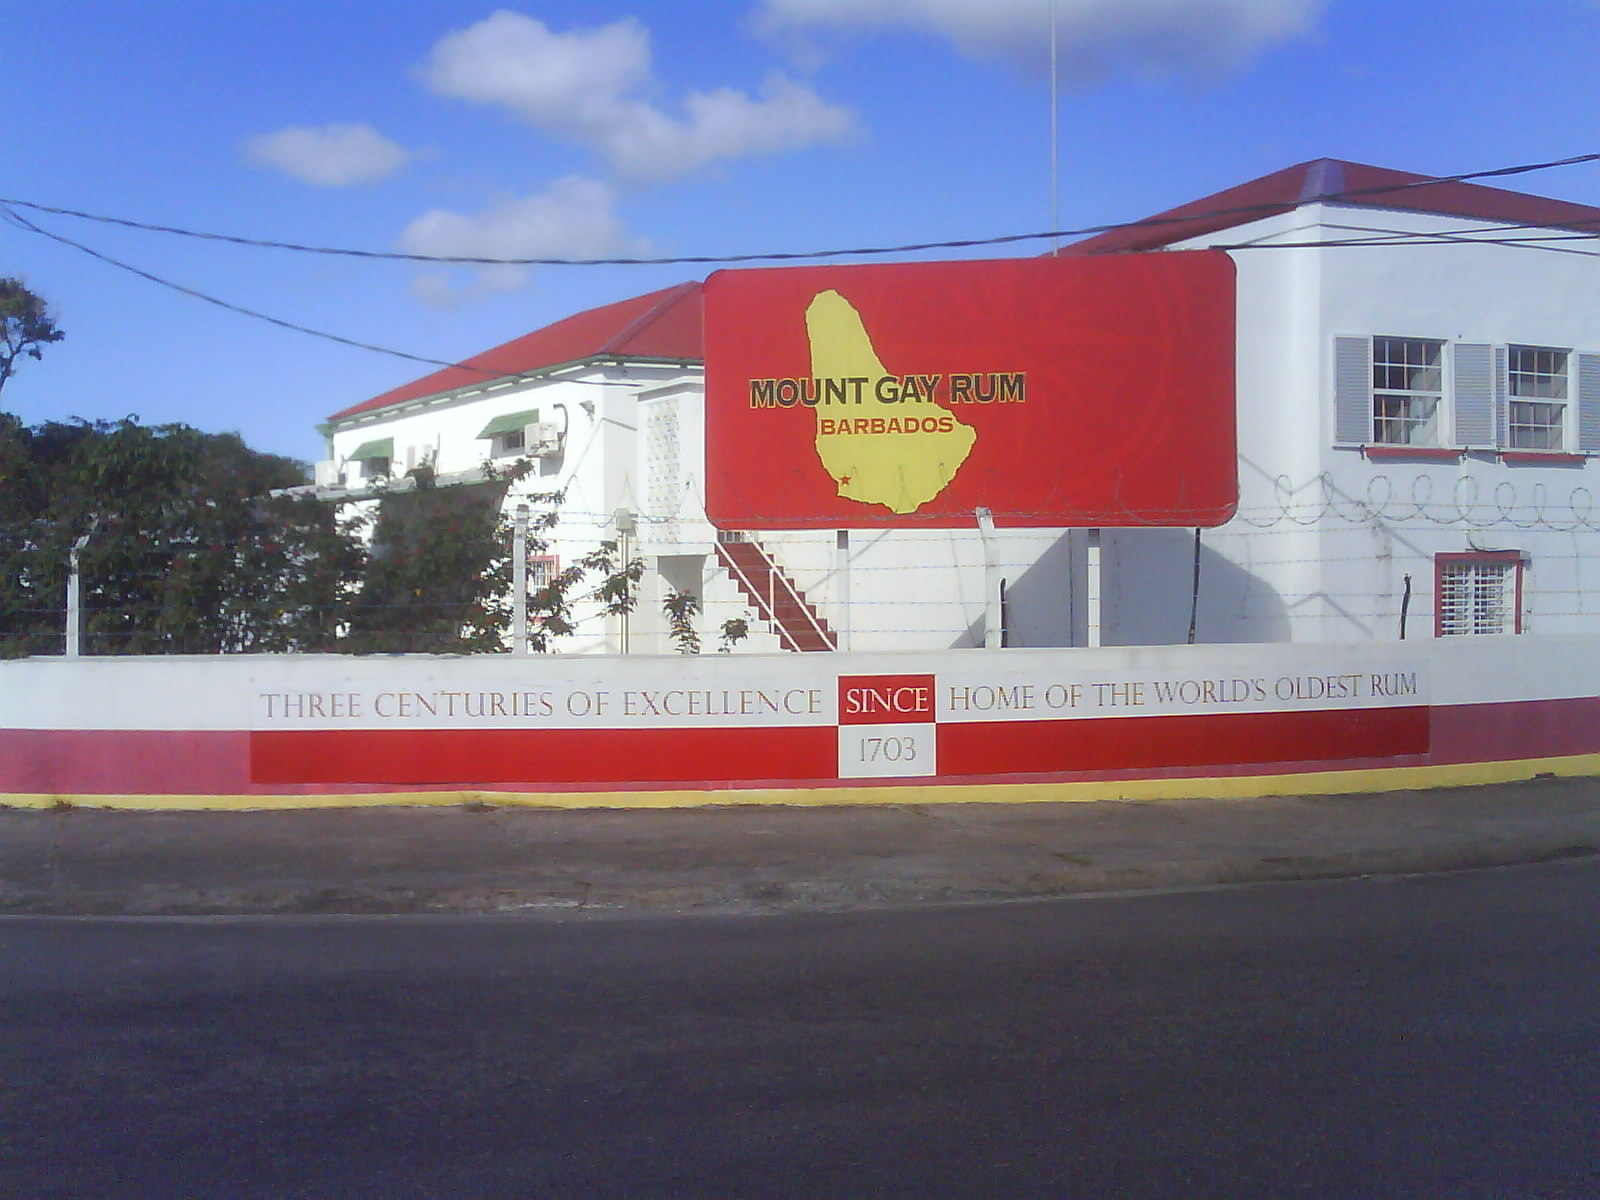 Mount Gay Rum Visitors Centre in Barbados, as situated along the Spring Garden Highway near Brighton's Beach. It claims to be the oldest remaining Rum company in the world with the earliest surviving deed from 1703.CaribDigita, CC0, via Wikimedia Commons